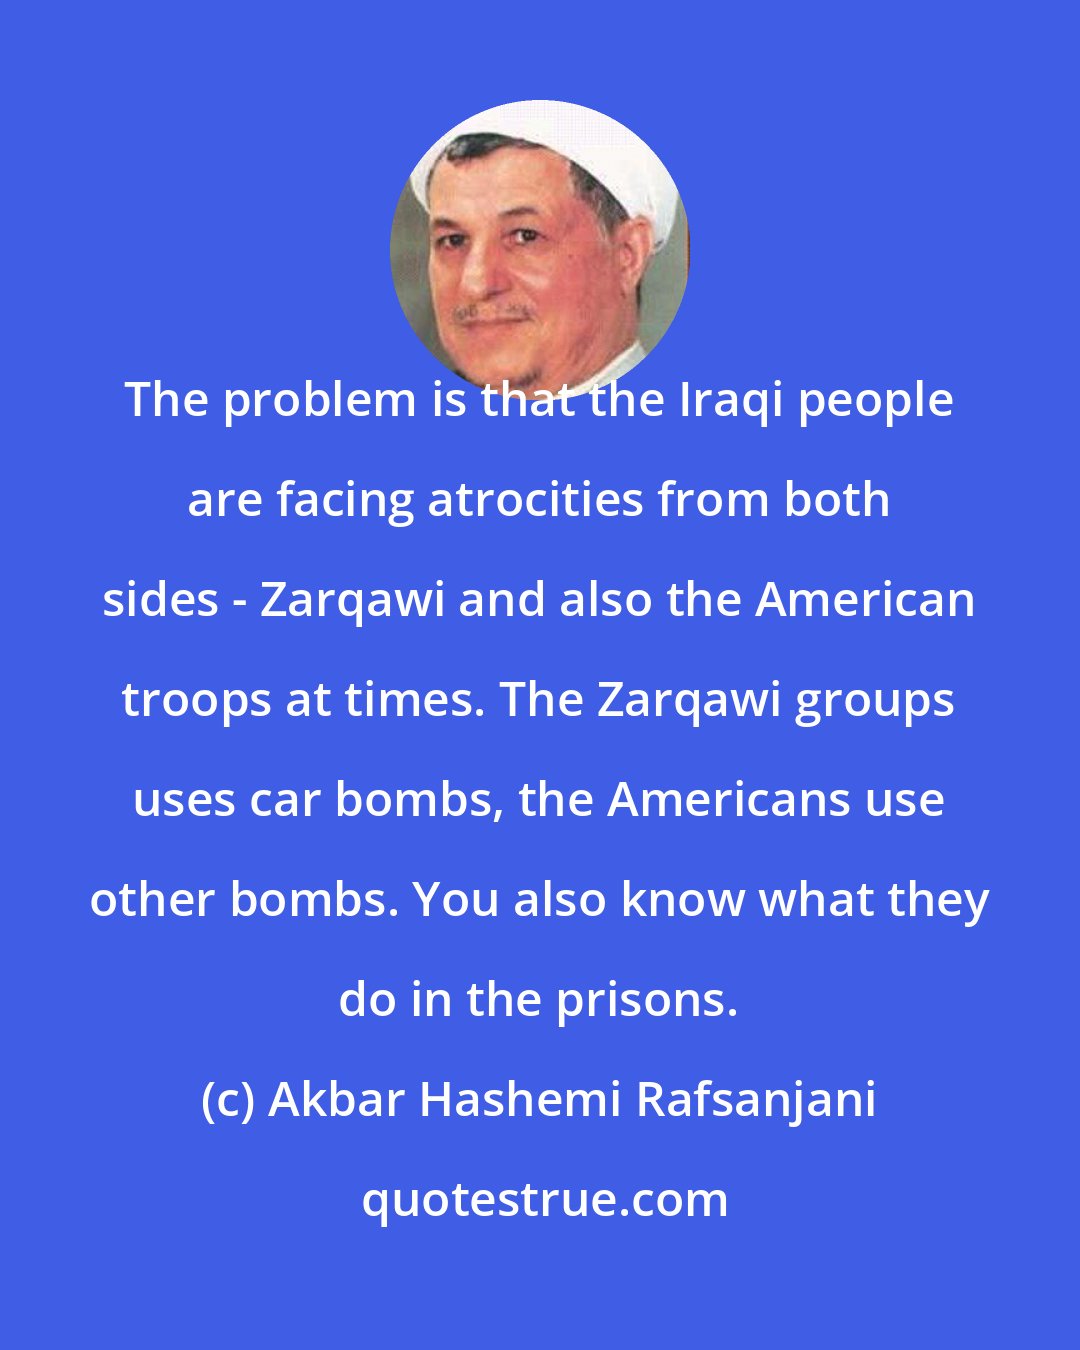 Akbar Hashemi Rafsanjani: The problem is that the Iraqi people are facing atrocities from both sides - Zarqawi and also the American troops at times. The Zarqawi groups uses car bombs, the Americans use other bombs. You also know what they do in the prisons.